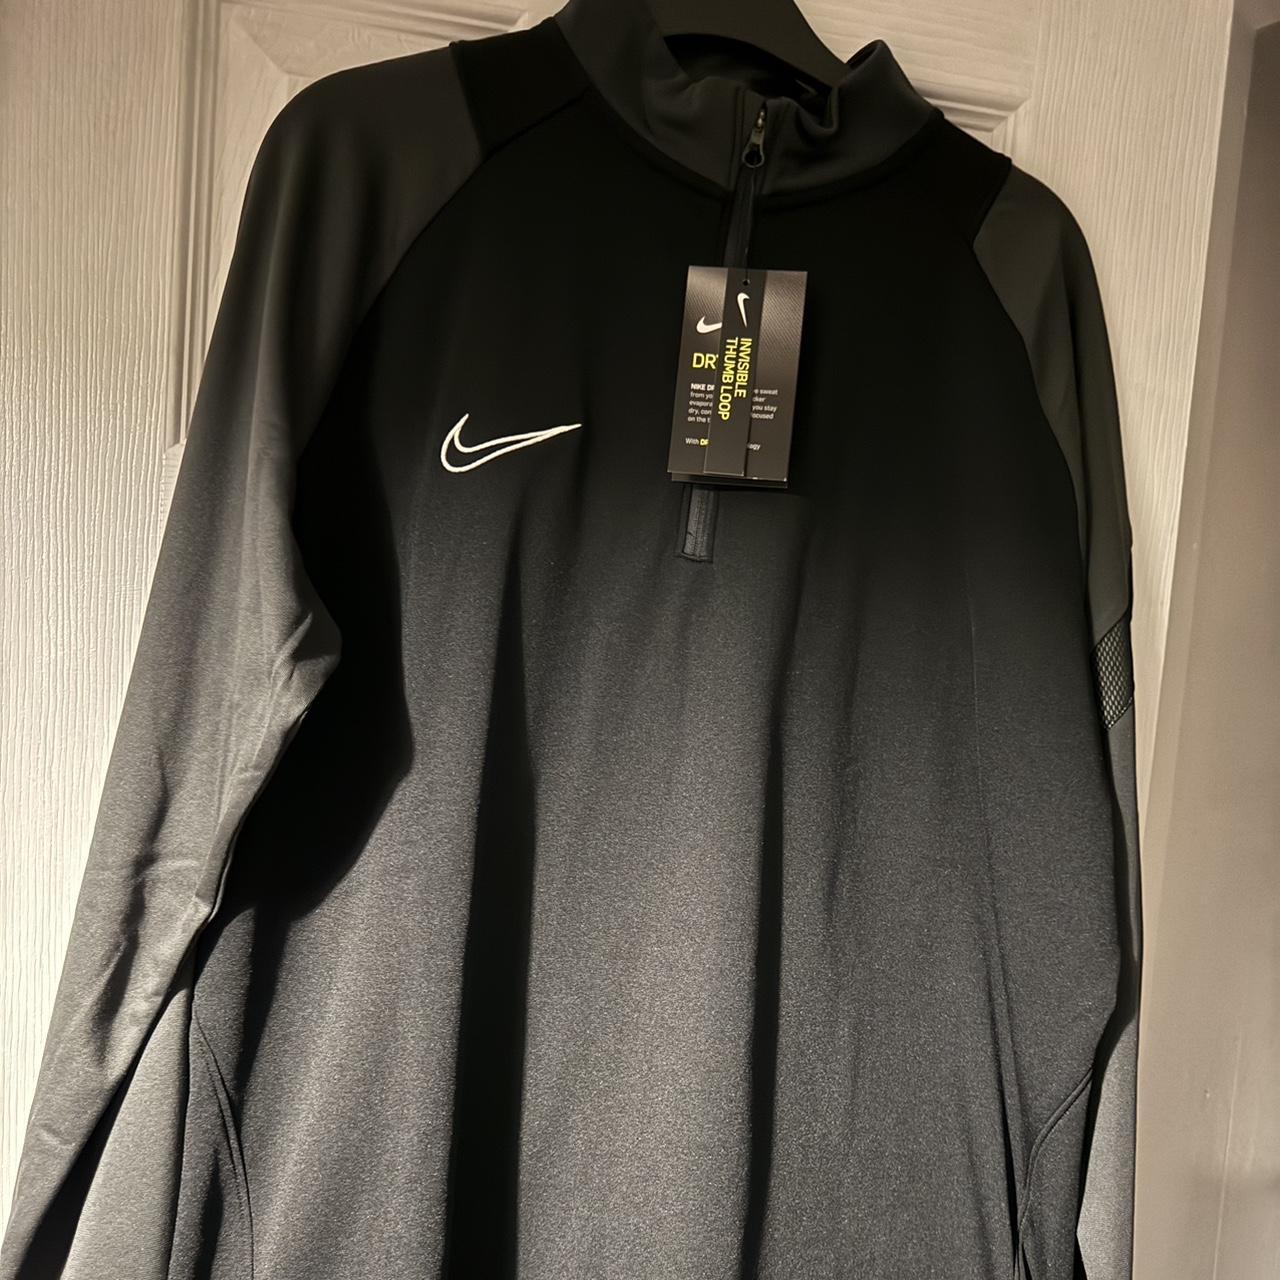 Nike DRI-FIT 1/4 zipper Brand new with tags, never... - Depop